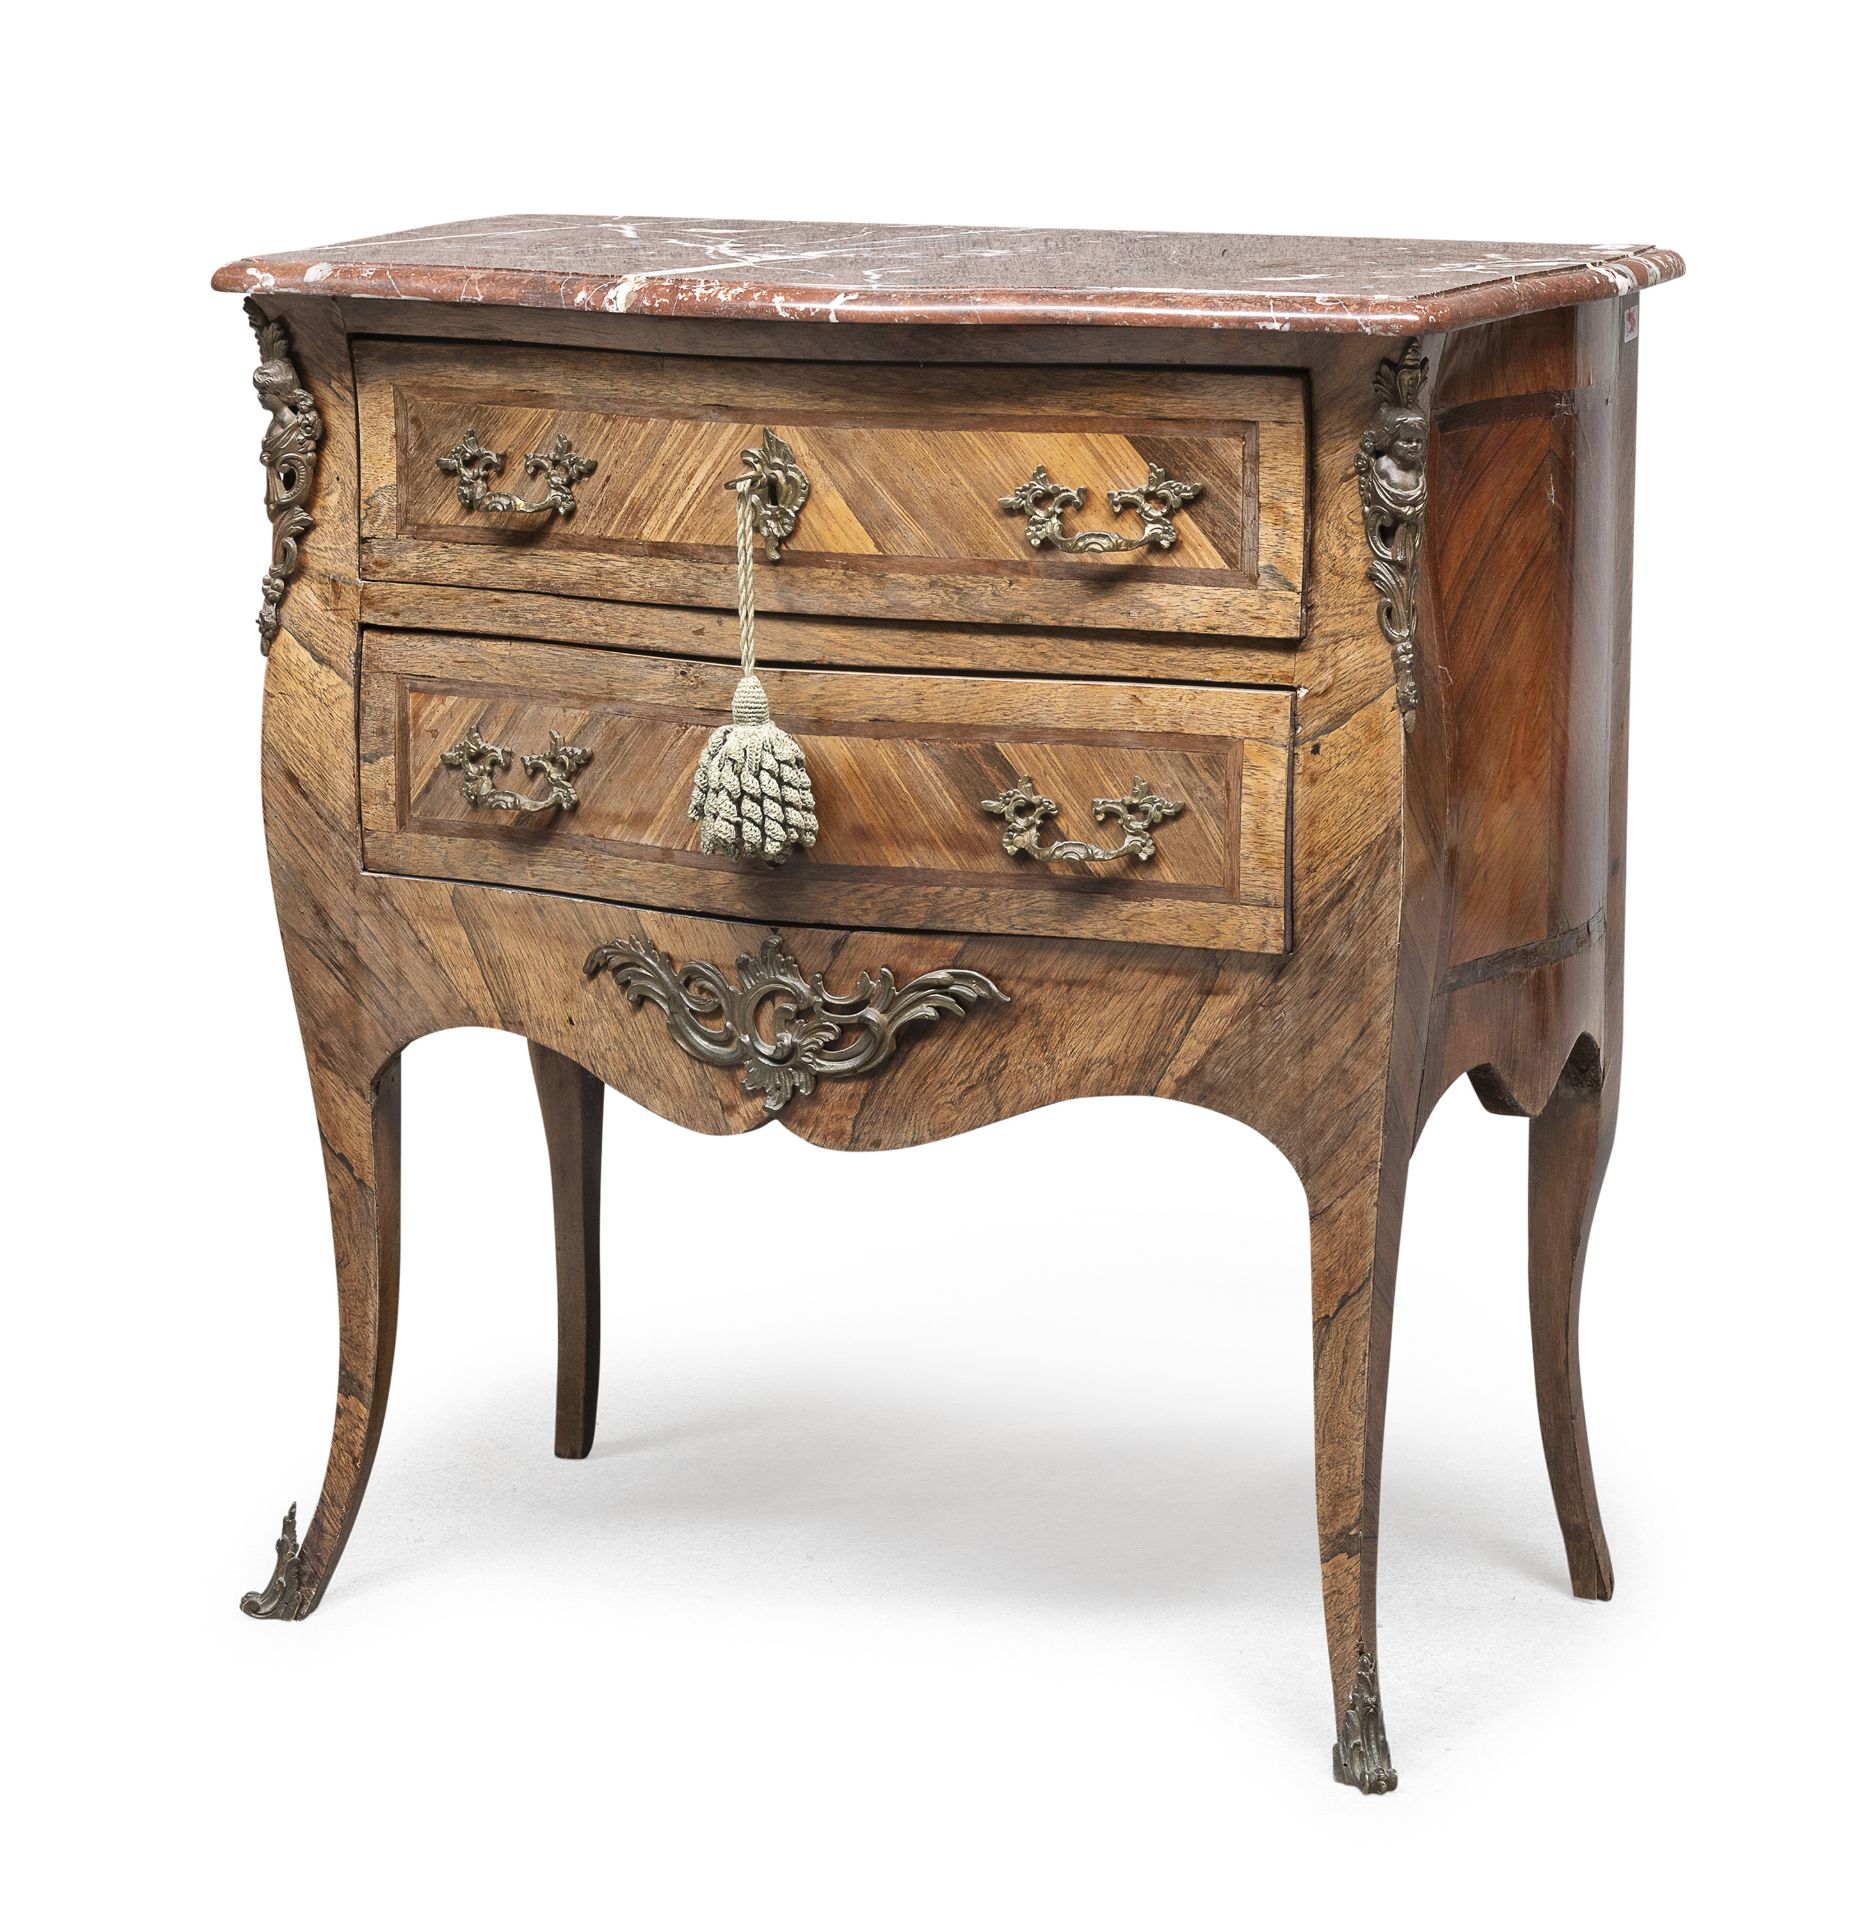 SMALL BIRCH BRIAR COMMODE PROBABLY FRANCE 18TH CENTURY